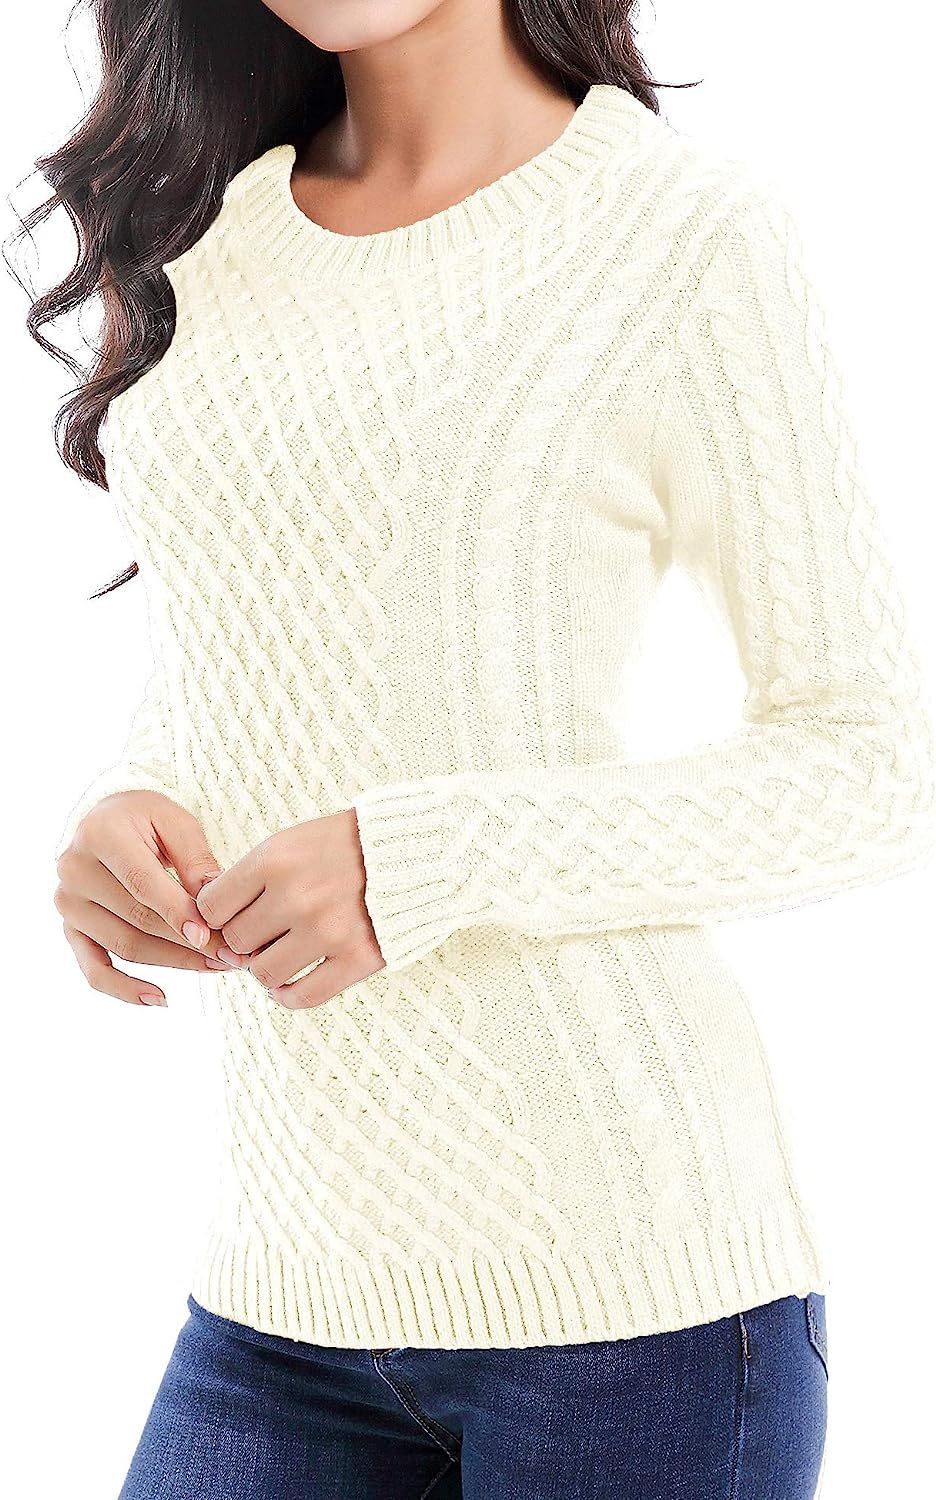 v28 Women Crew Neck Knit Stretchable Elasticity Long Sleeve Sweater Jumper Pullover | Amazon (US)